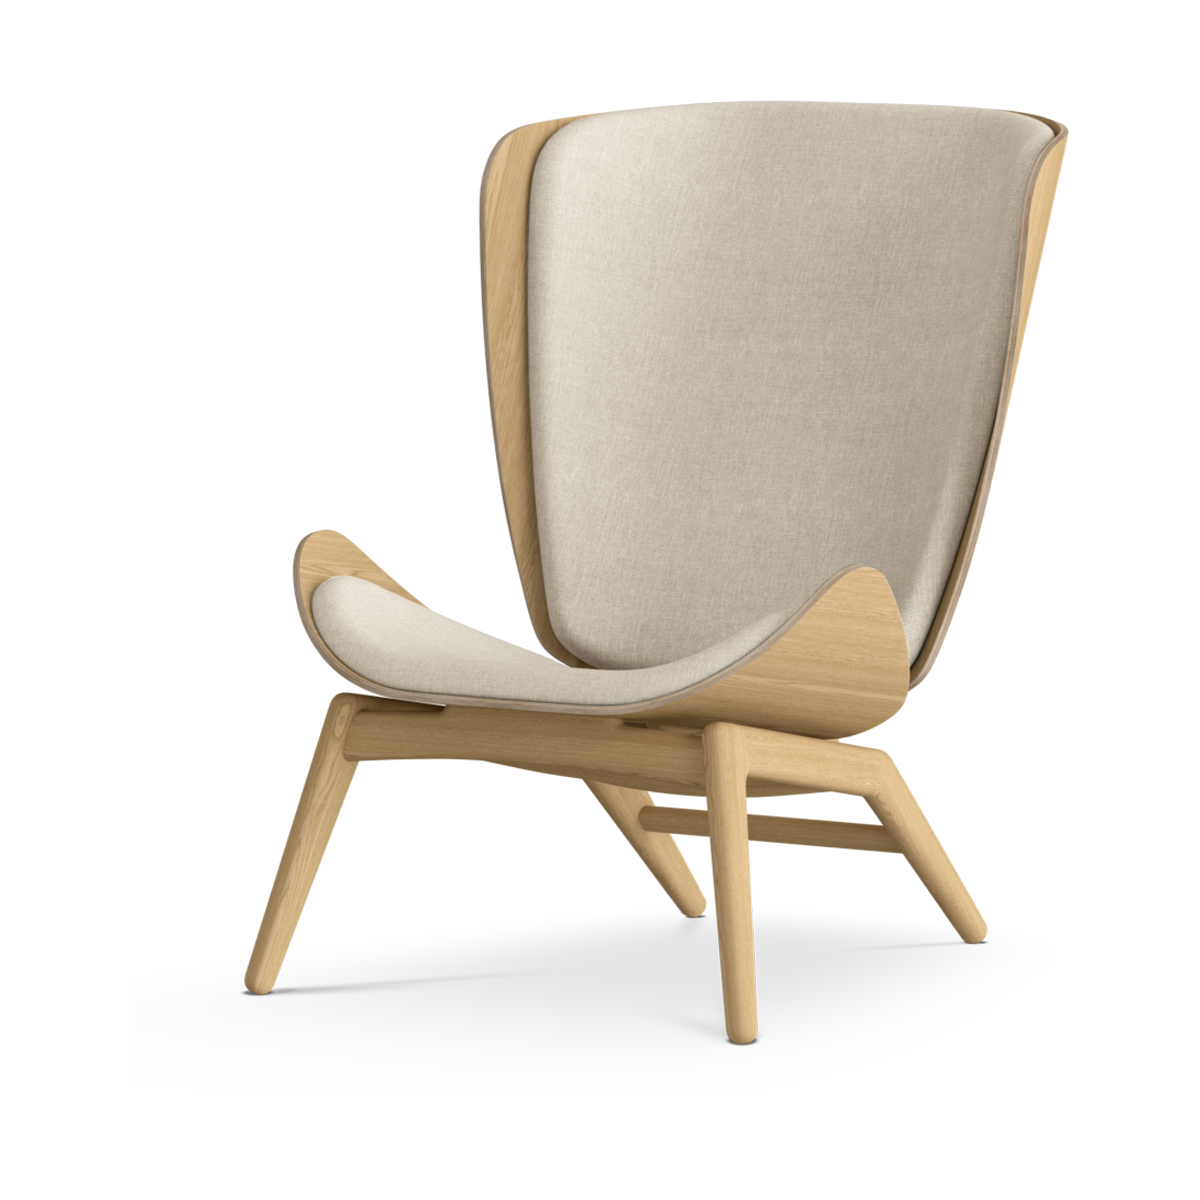 The Reader houten fauteuil White Sands